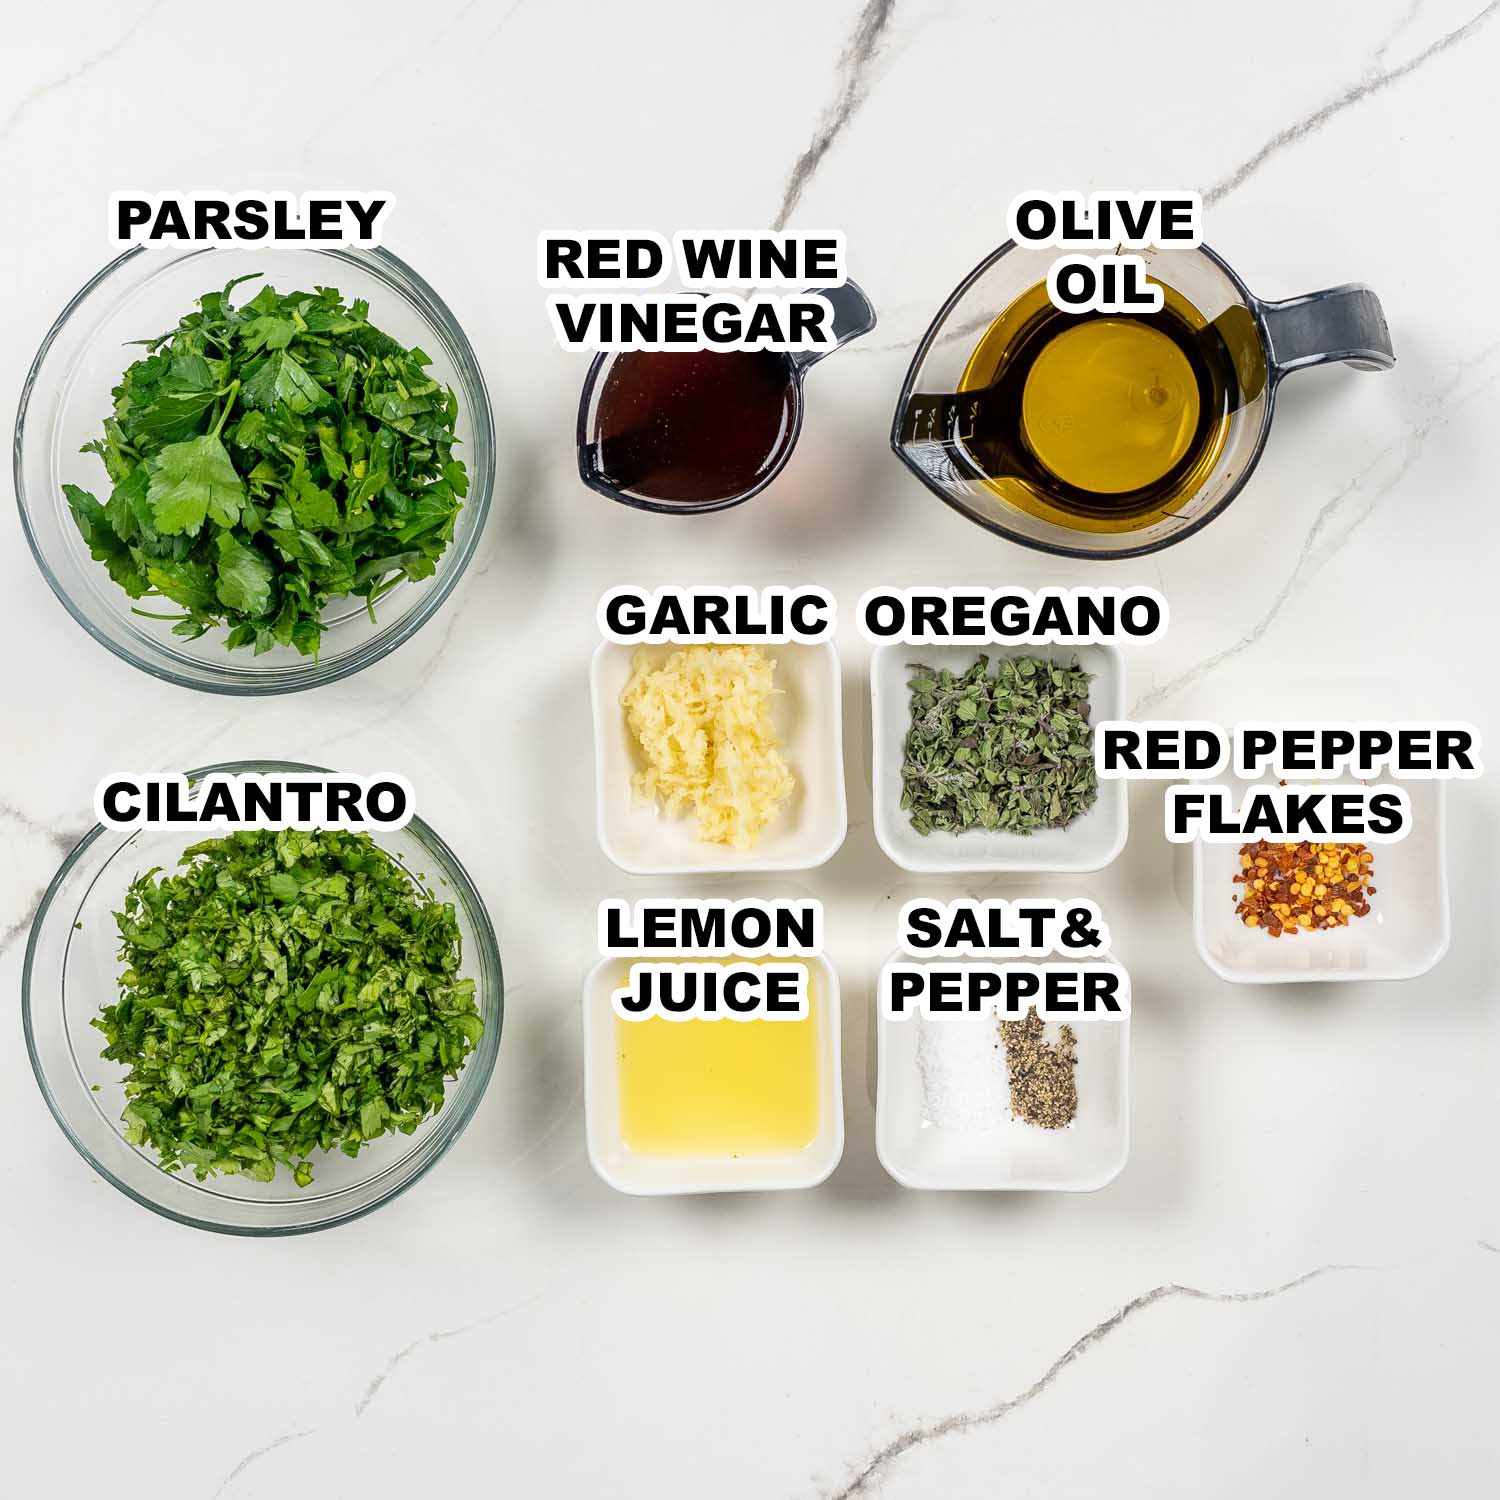 ingredients needed to make chimichurri sauce.